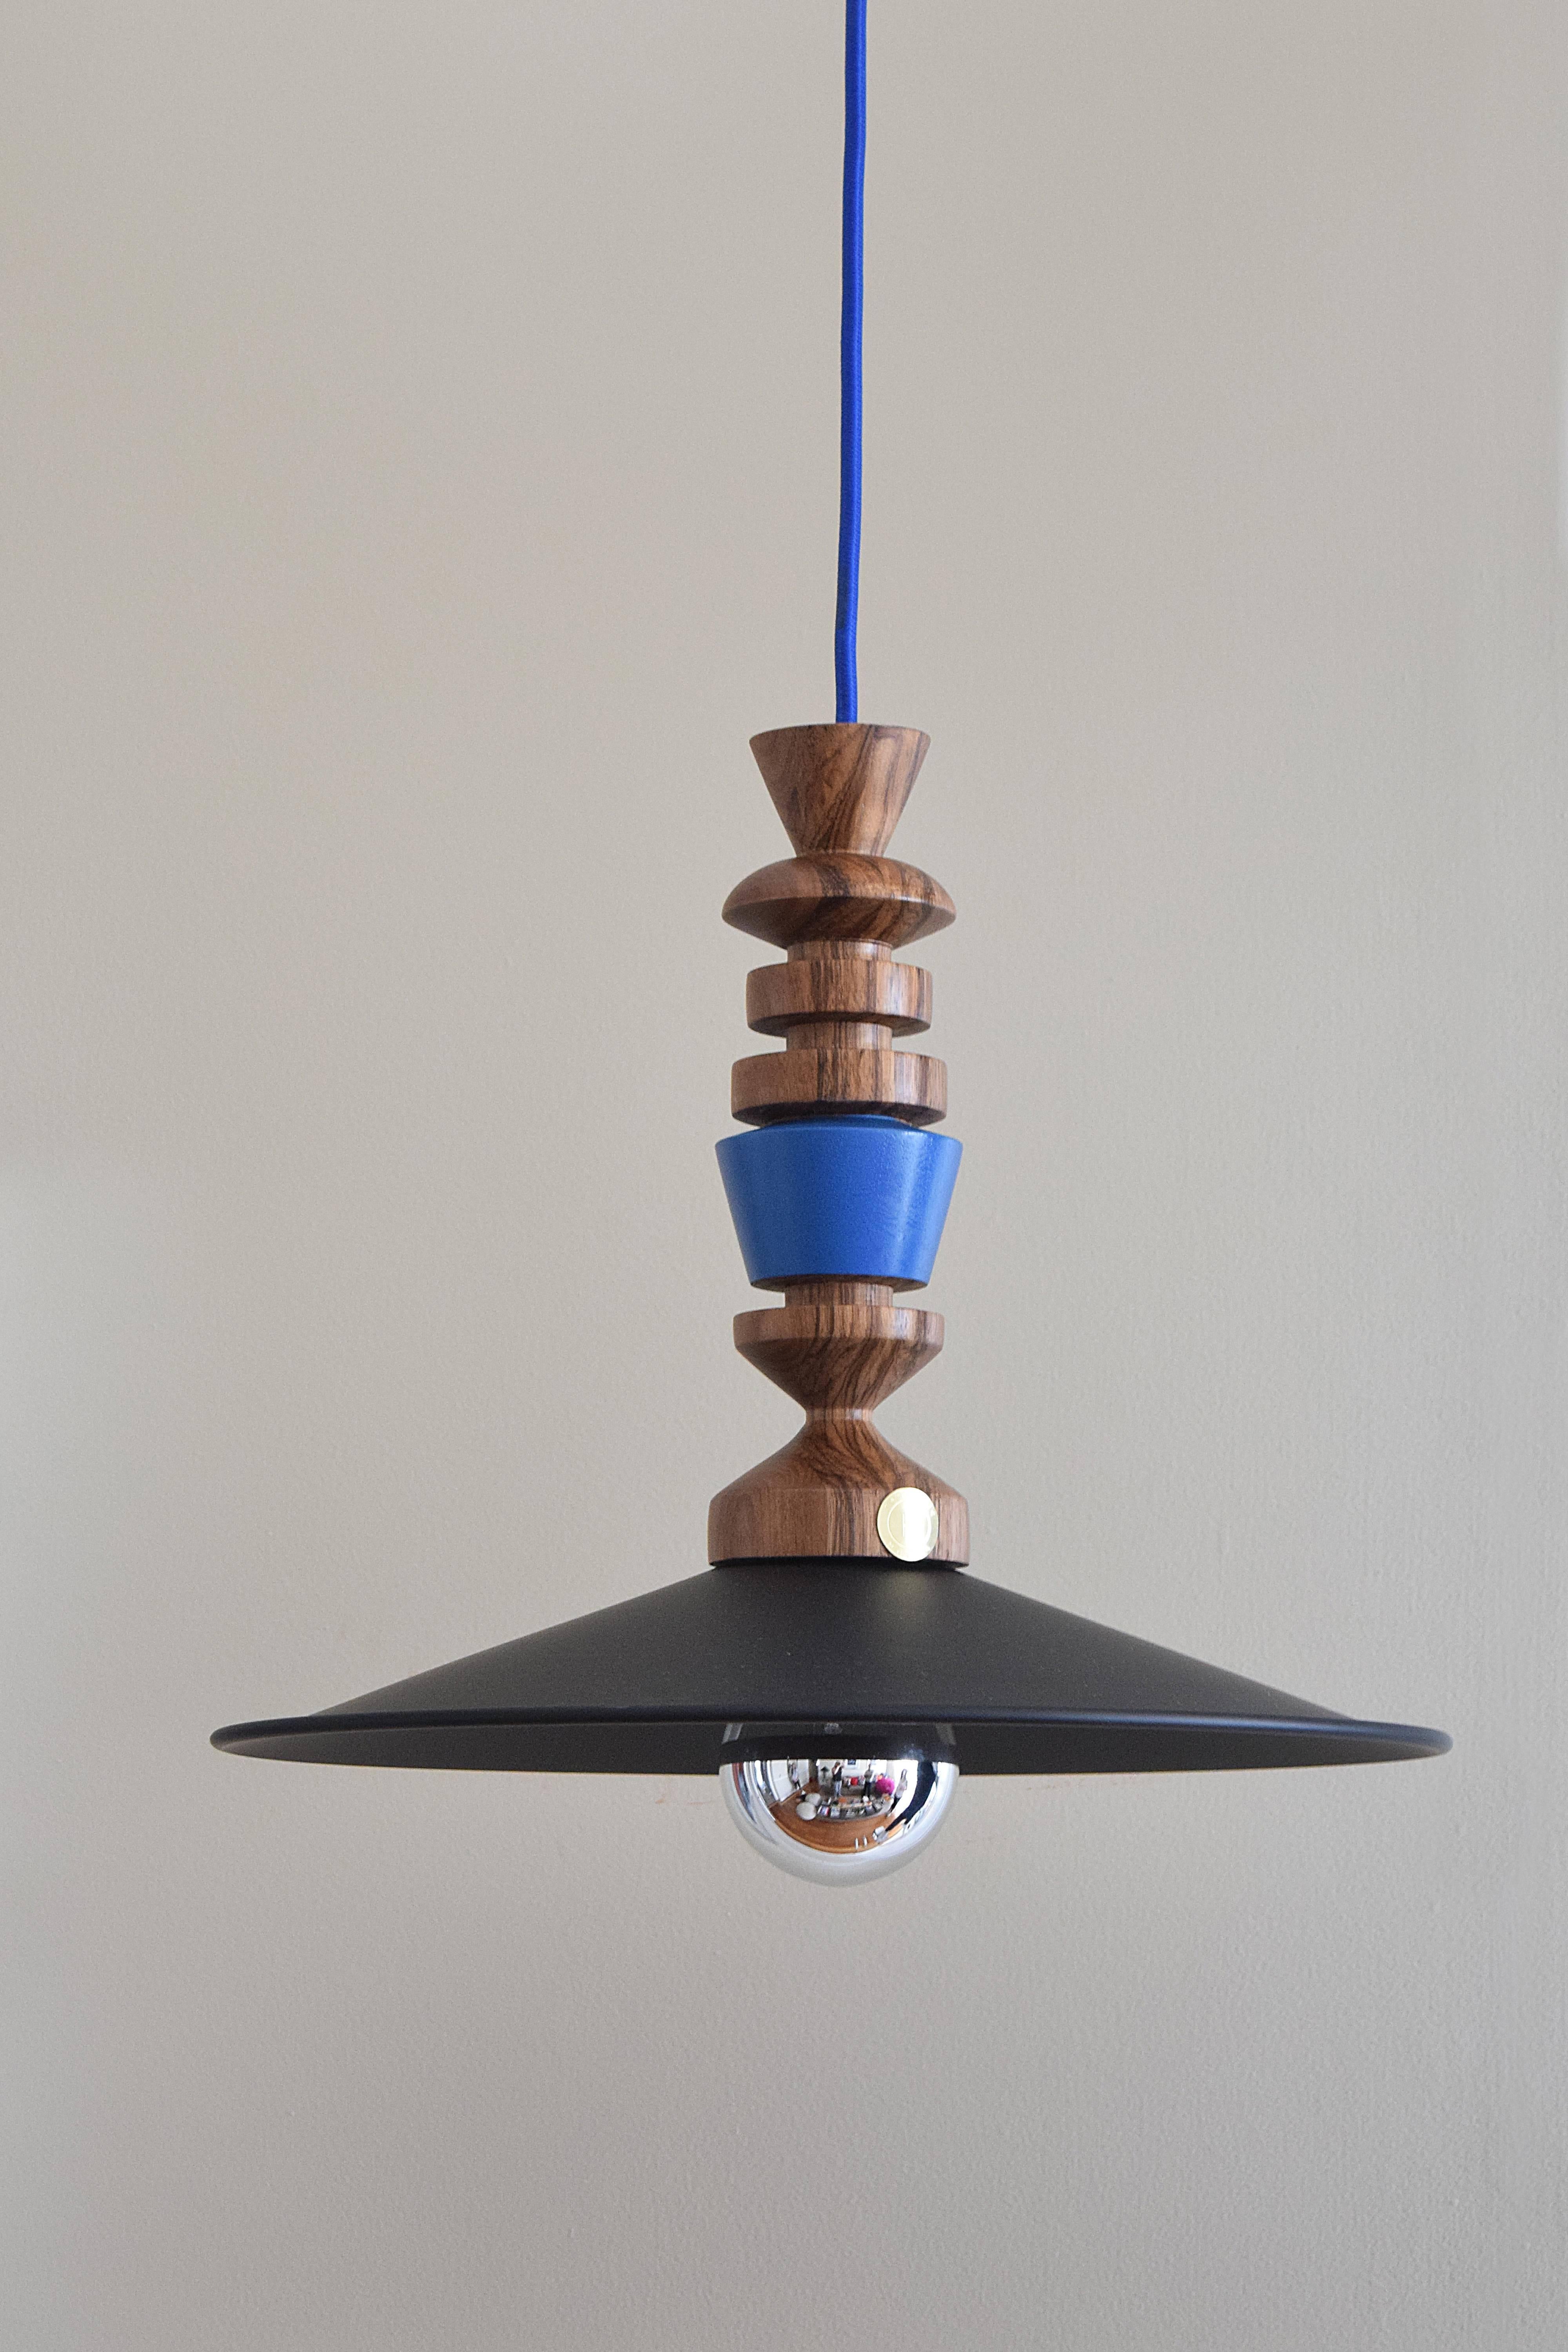 Alquisiras lamps, made in this contemporary design, are born from the memory of ancient Mexican wood toys. This pieces remind us of those playful moments when we were kids. It reminds us of our traditional pirinolas (spinning tops), our grandparents